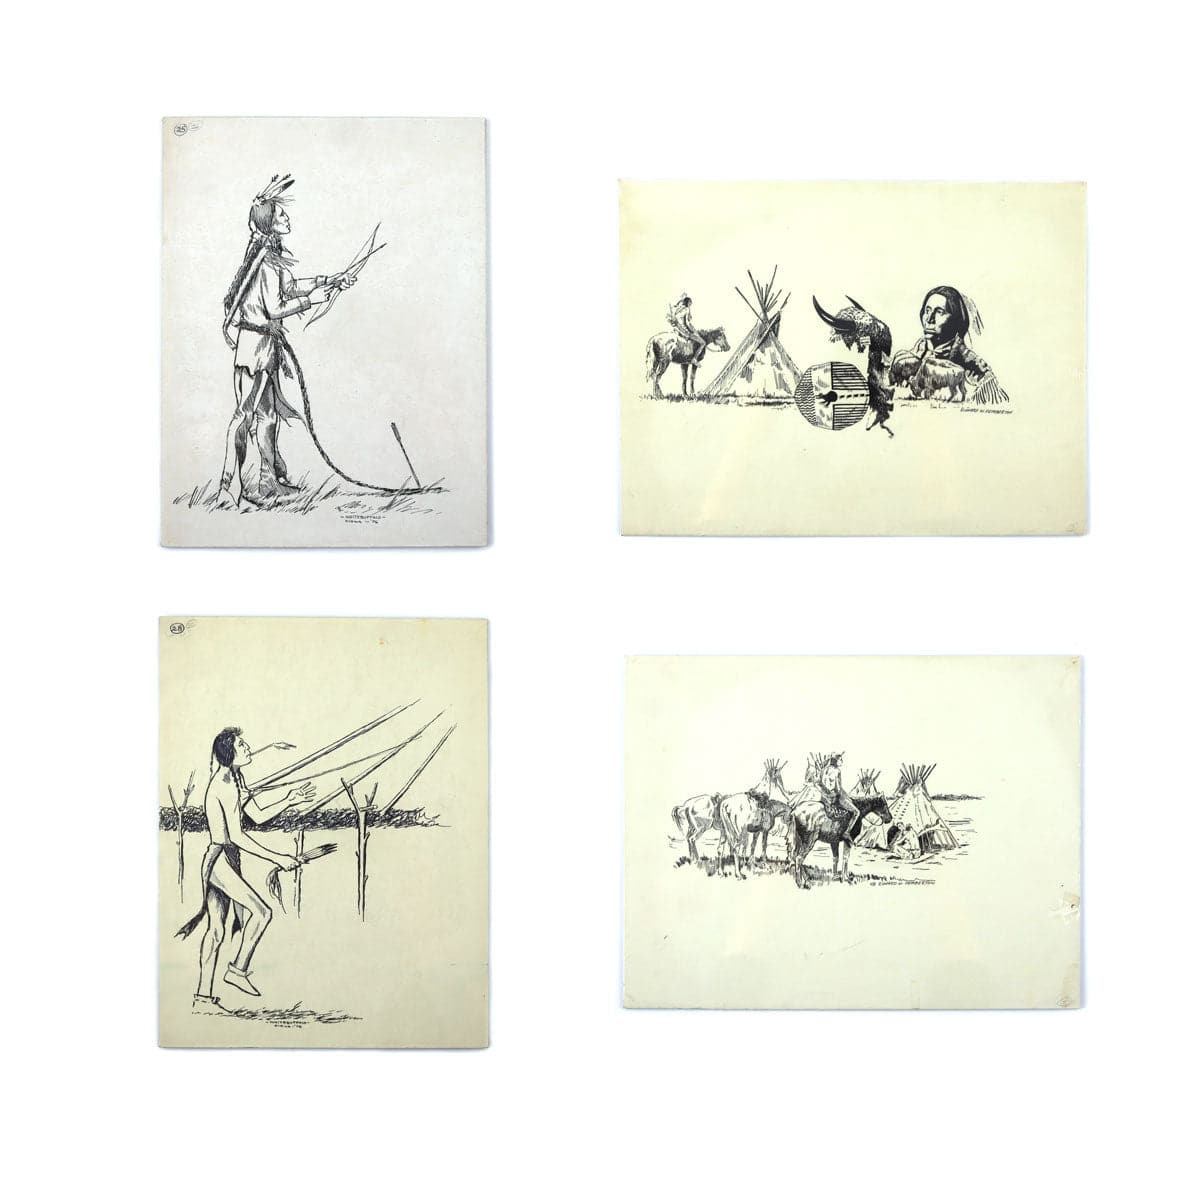 Group of 56 Original Kiowa Drawings, 120 Anko Calendar Drawings, and 13 Vinyl Records of Songs Arranged and Sung by Various Singers of the Southern and Northern Plains Tribes (M90218C-0621-001)16